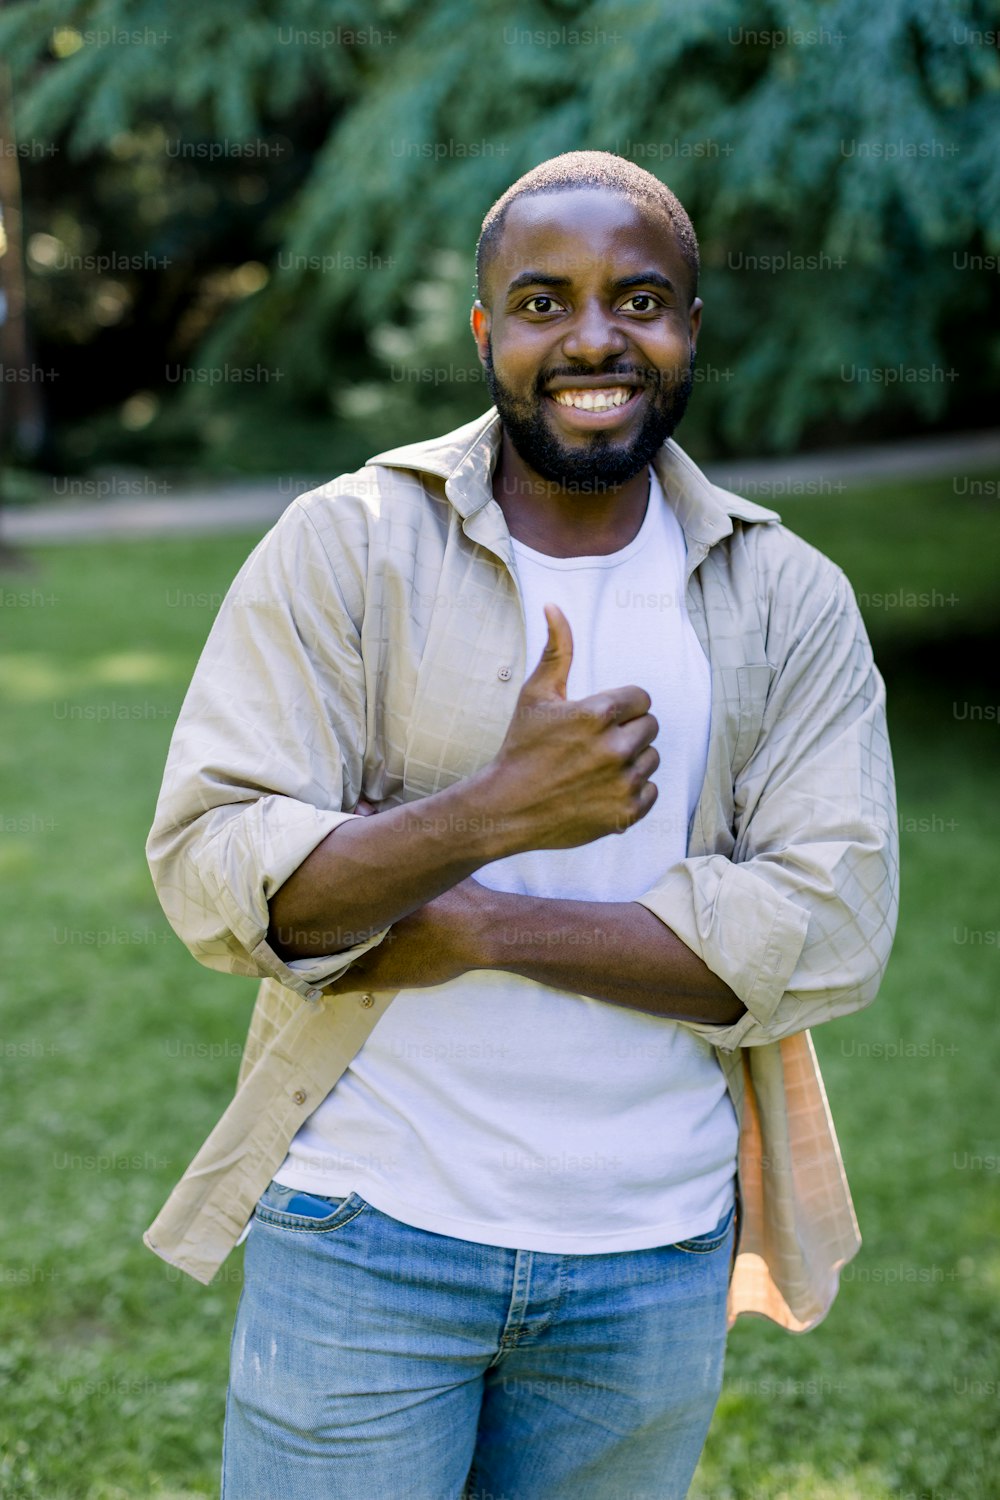 Outdoor casual lifestyle portrait of young African dark skinned man, wearing white t-shirt, beige shirt and jeans, smiling to camera in park nature, showing his thumb up.